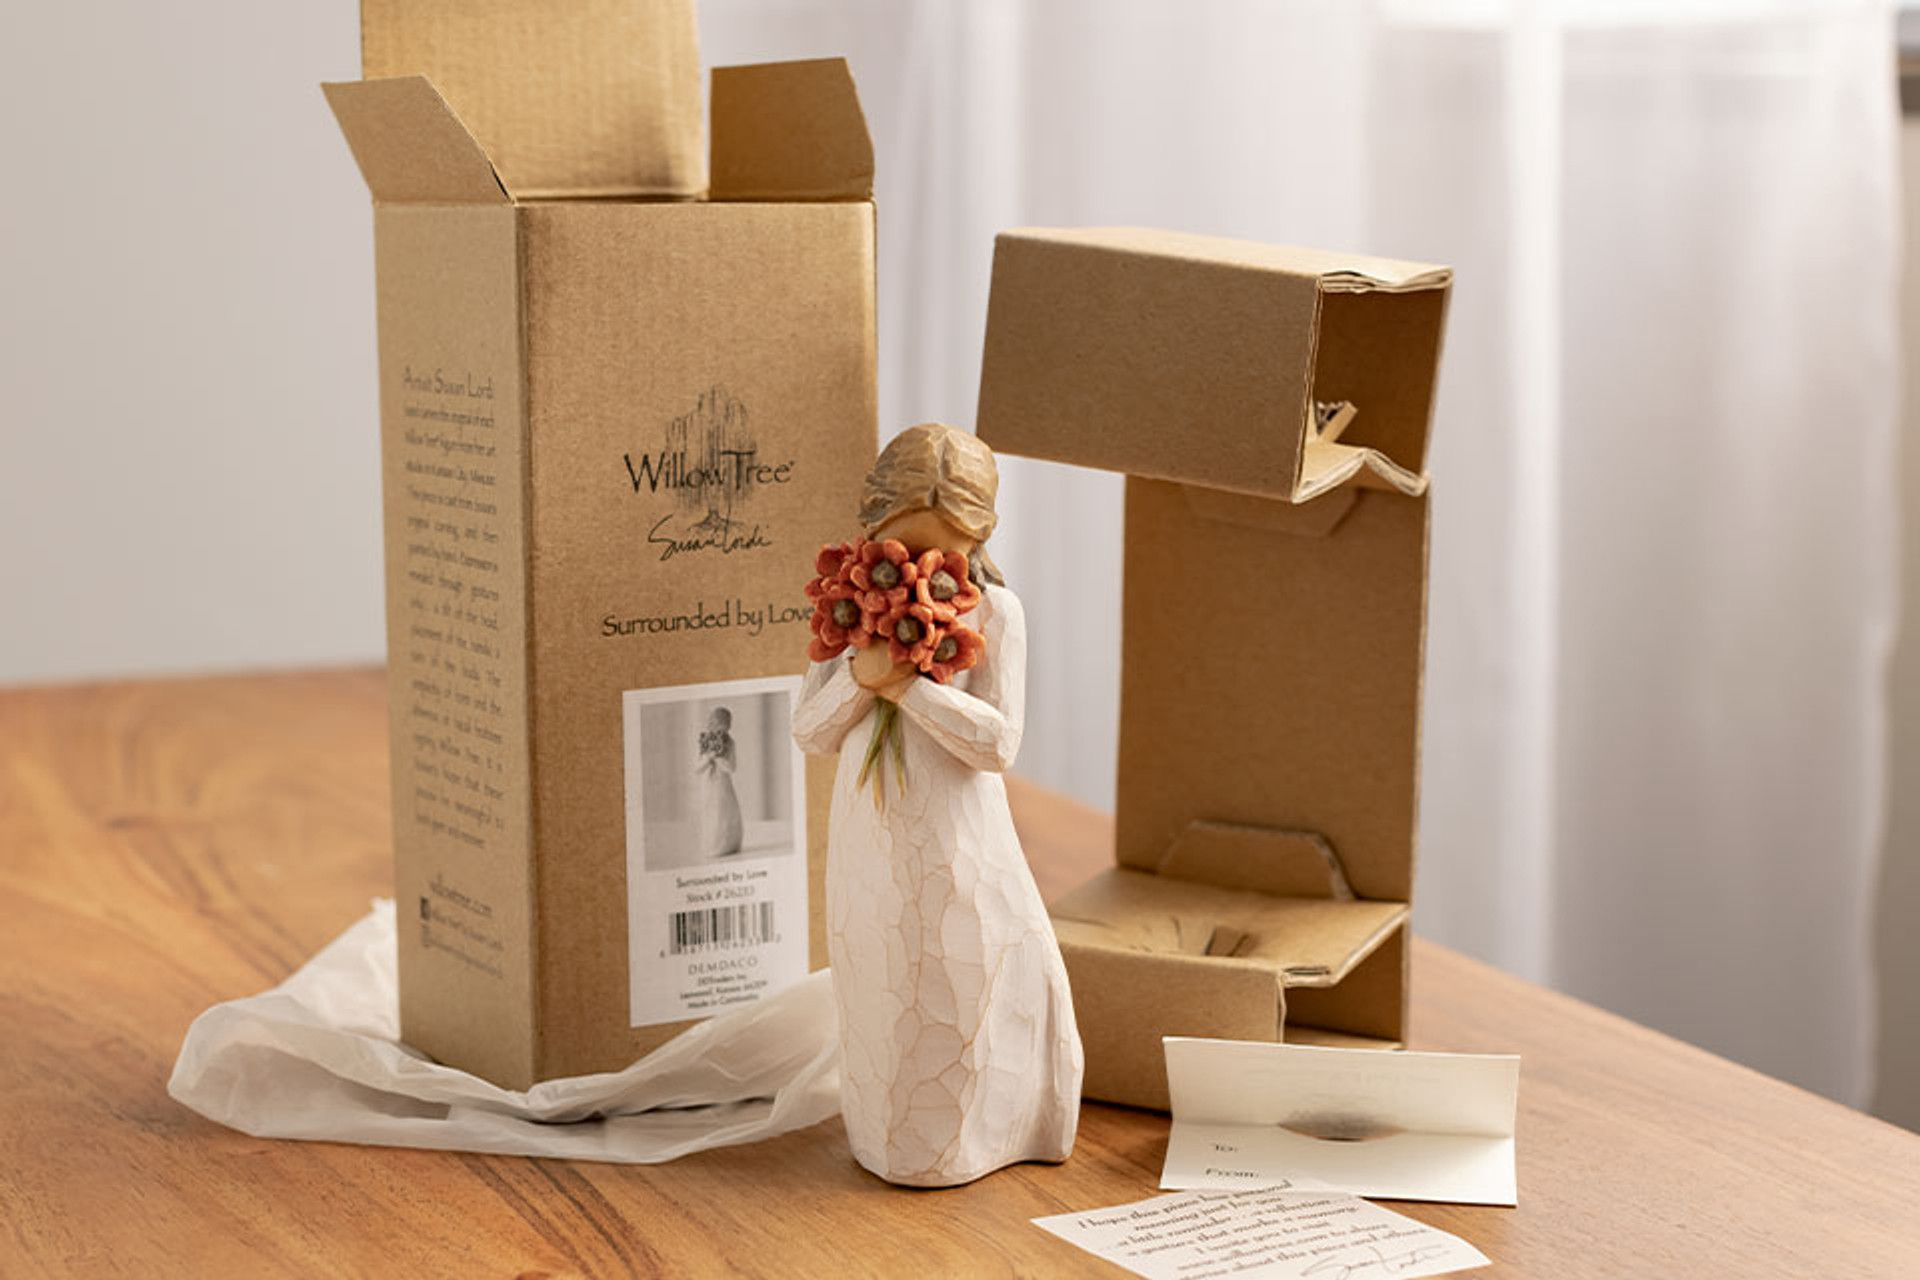 Our Sustainability Efforts with Eco-Friendly, Recyclable Packaging